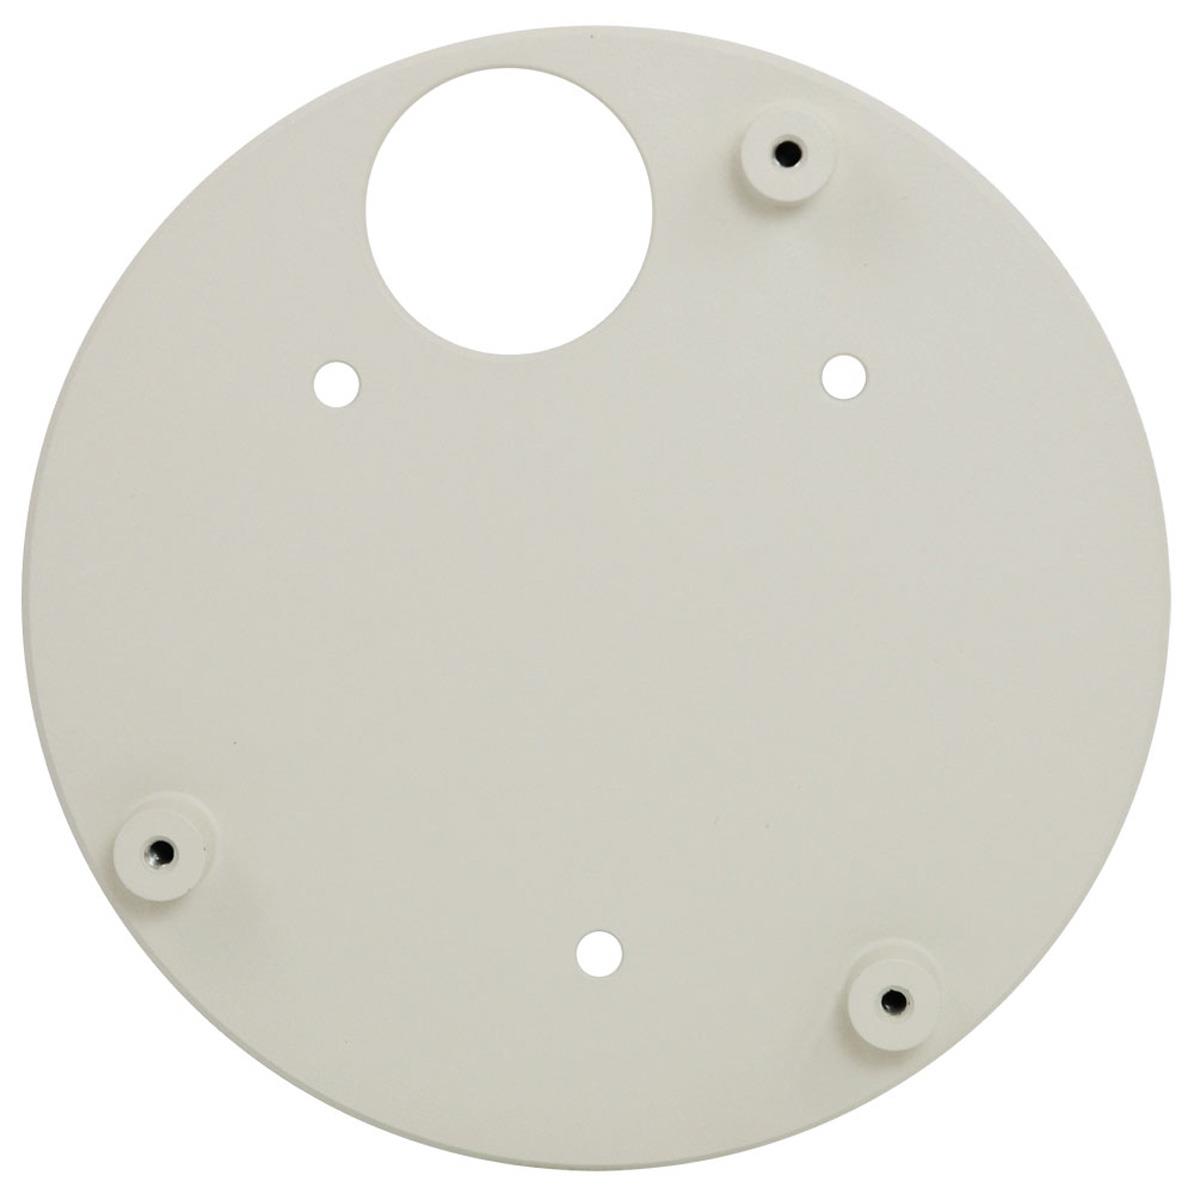 Image of ACTi PMAX-0802 Surface Mount for KCM-7911 Outdoor Hemispheric Cameras